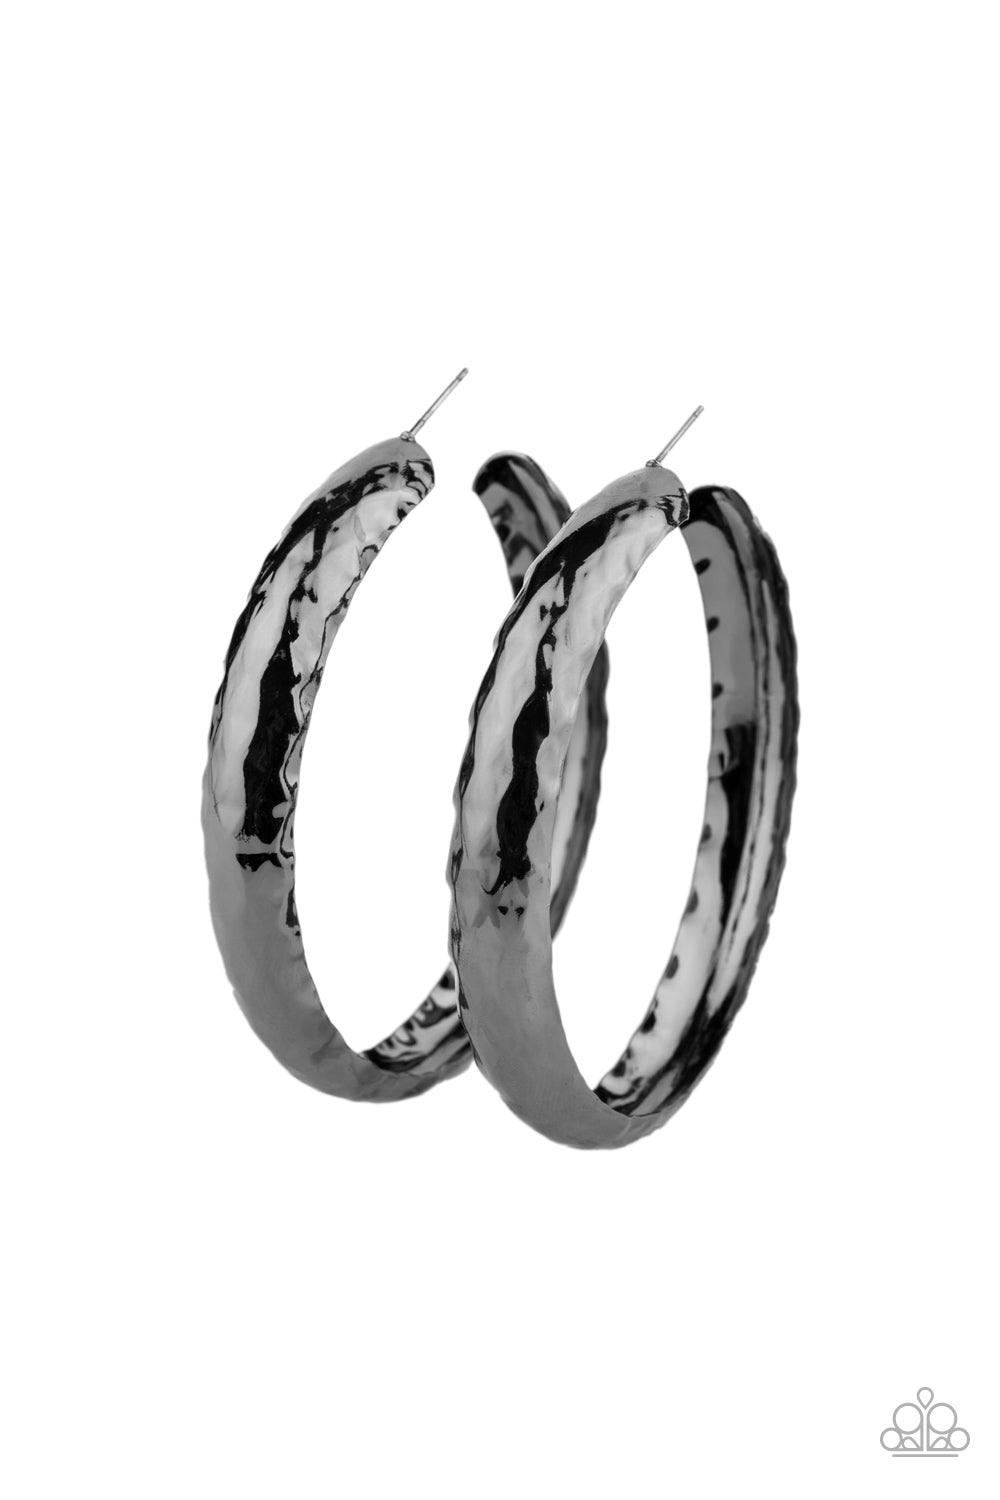 Paparazzi Accessories Check Out These Curves - Black Hoop Earrings - Lady T Accessories